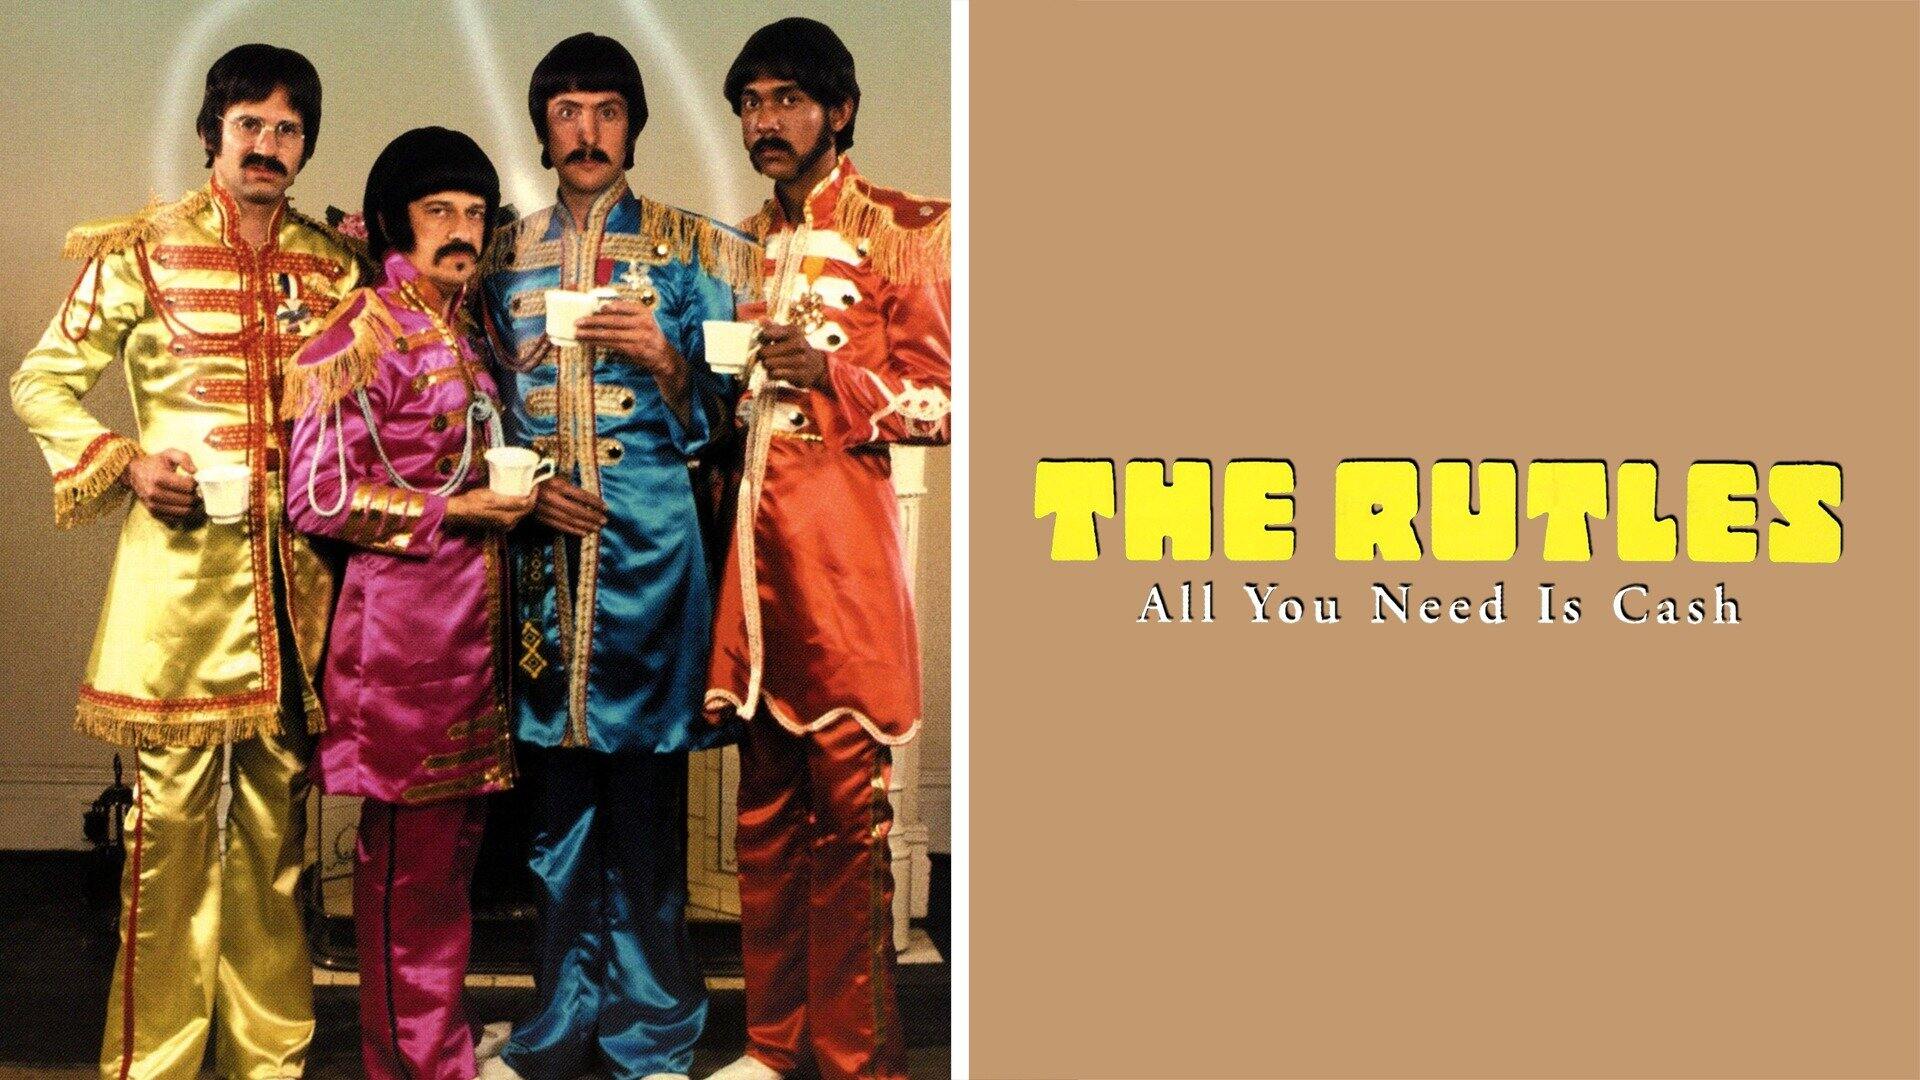 34-facts-about-the-movie-the-rutles-all-you-need-is-cash